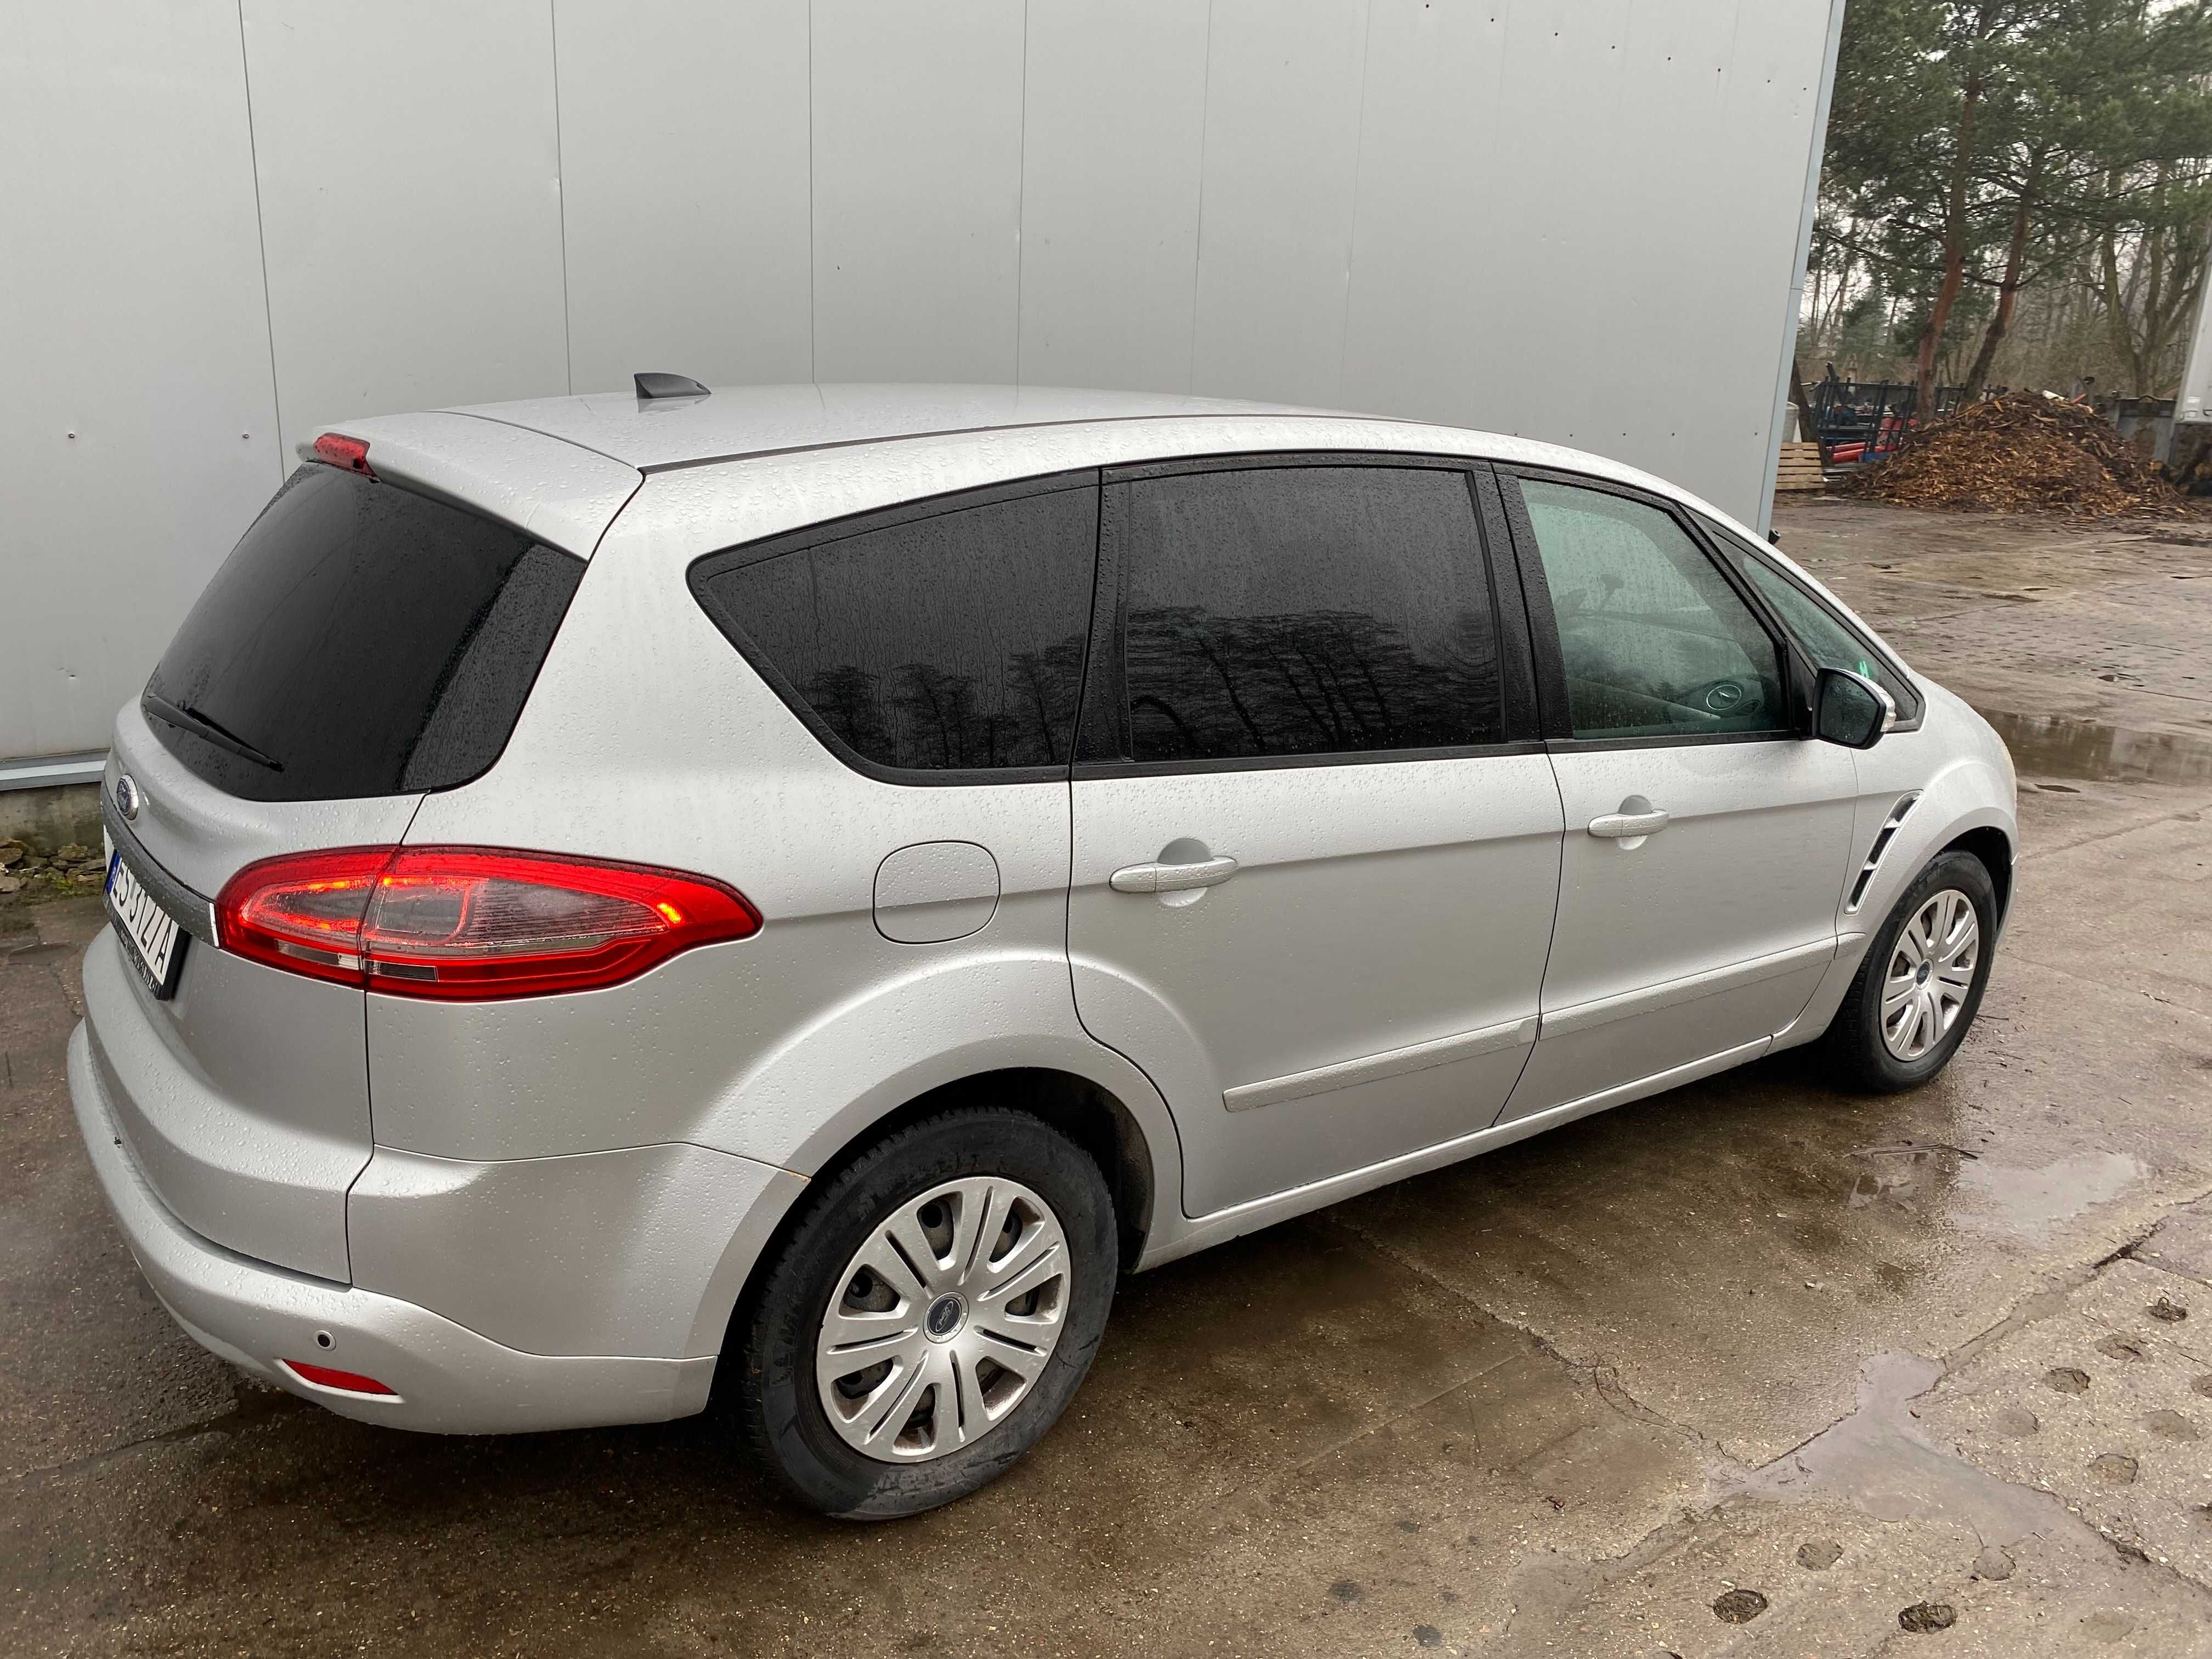 FORD S-Max 2.0 TDCi